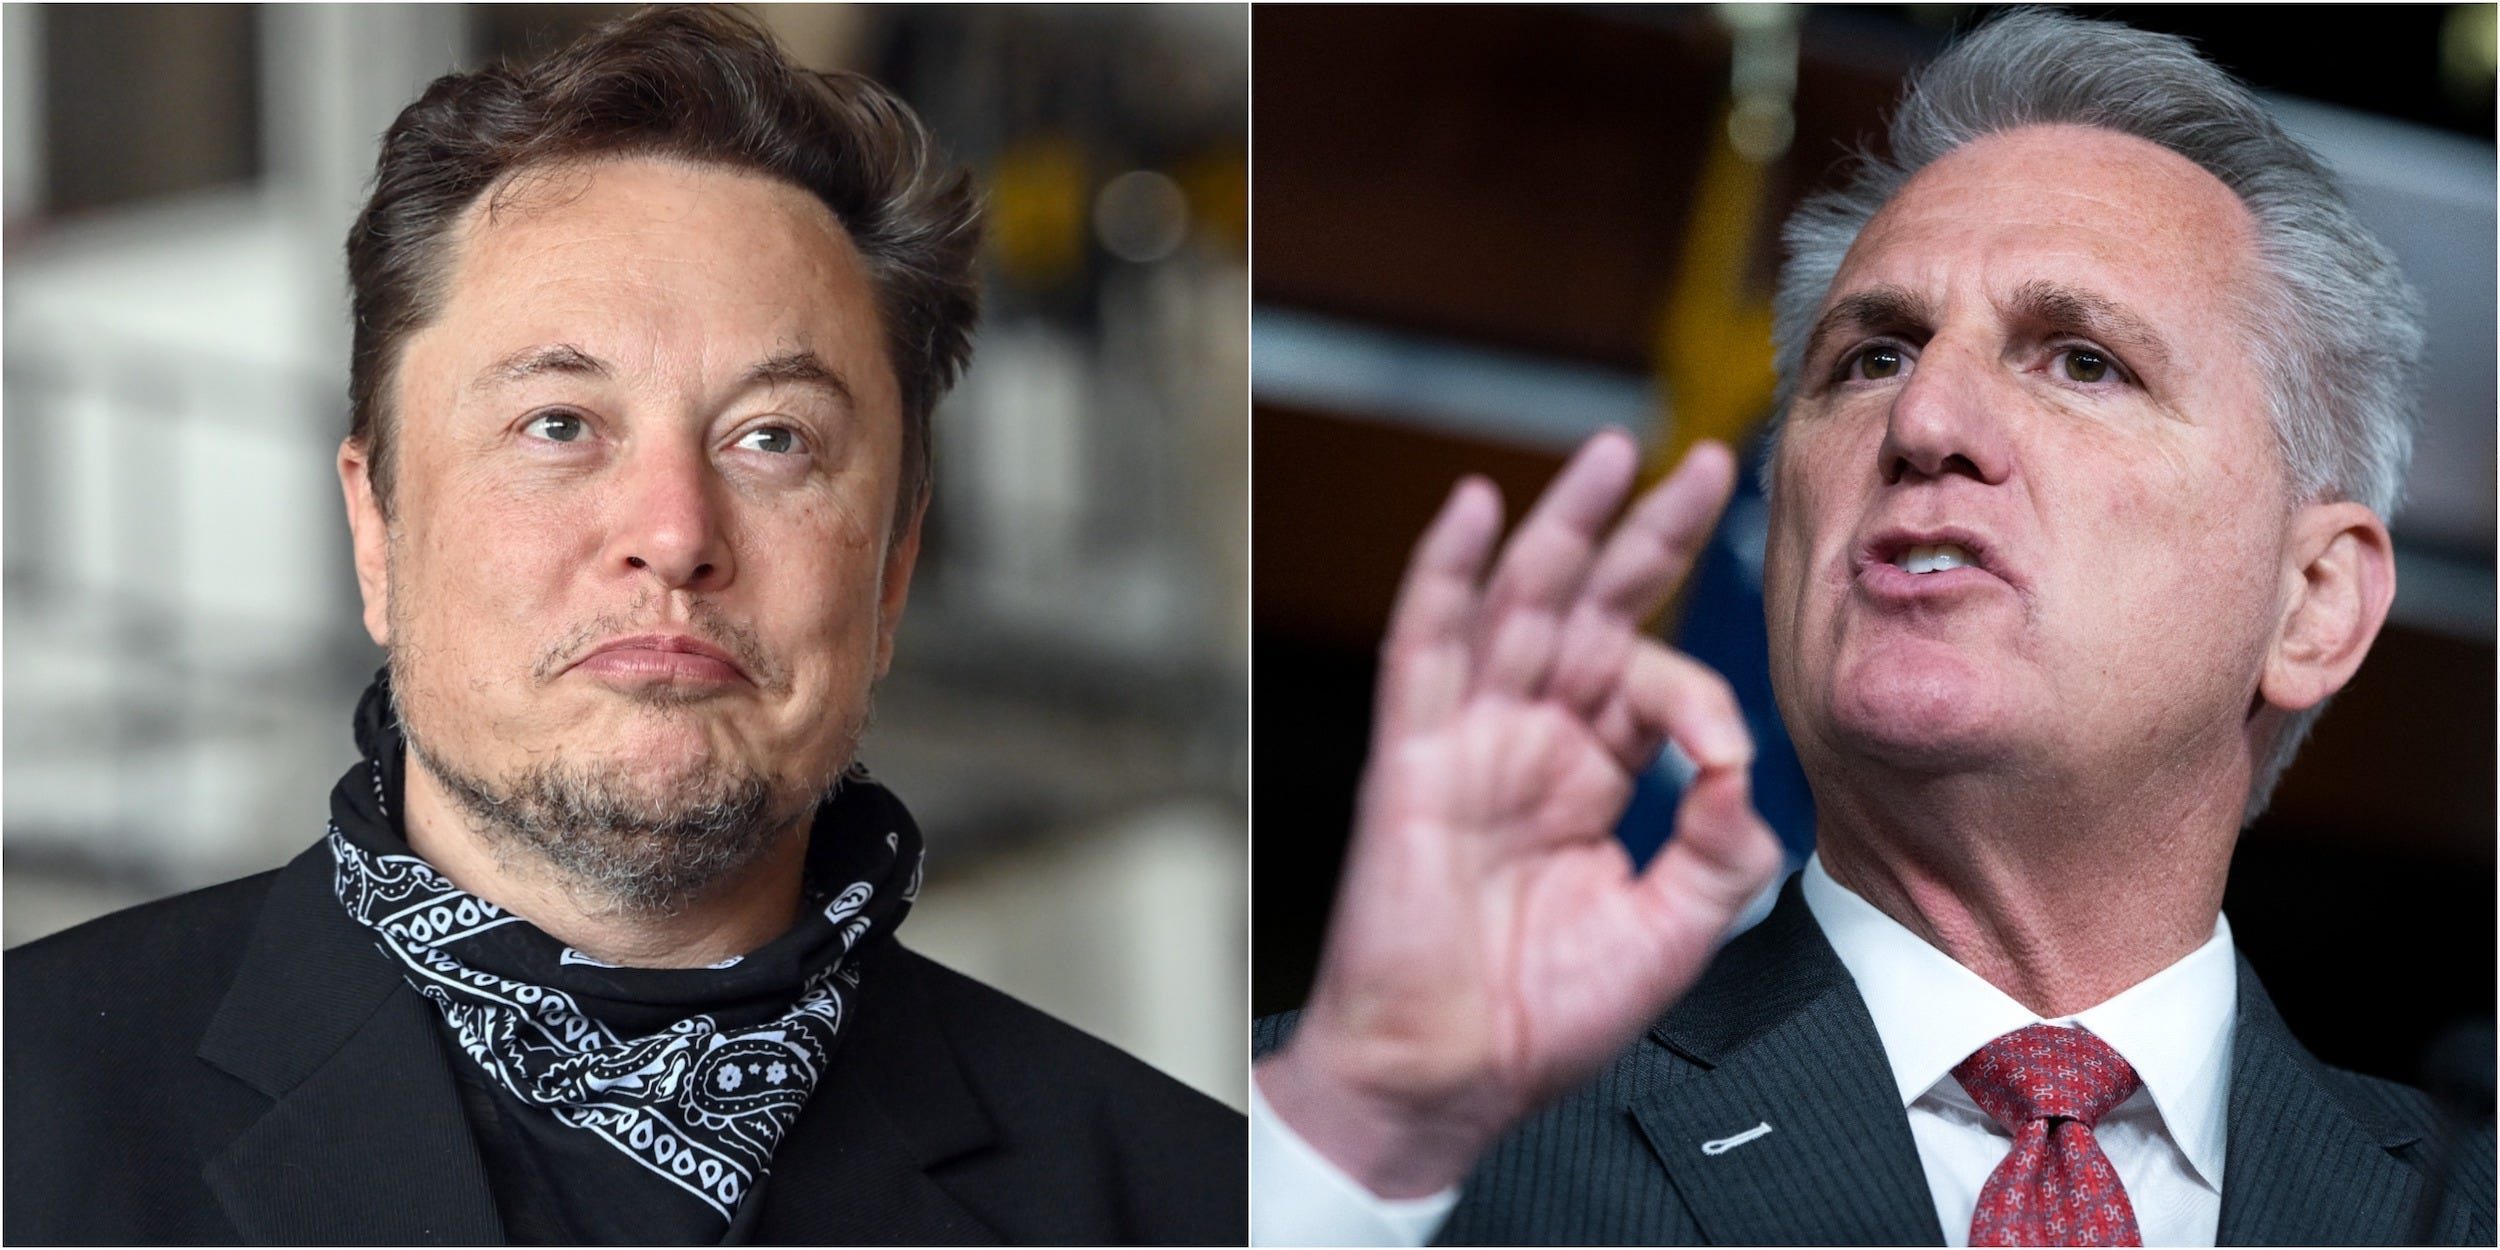 Collage: Elon Musk smirks, Kevin McCarthy gestures with an OK hand signal while pursing his lips.